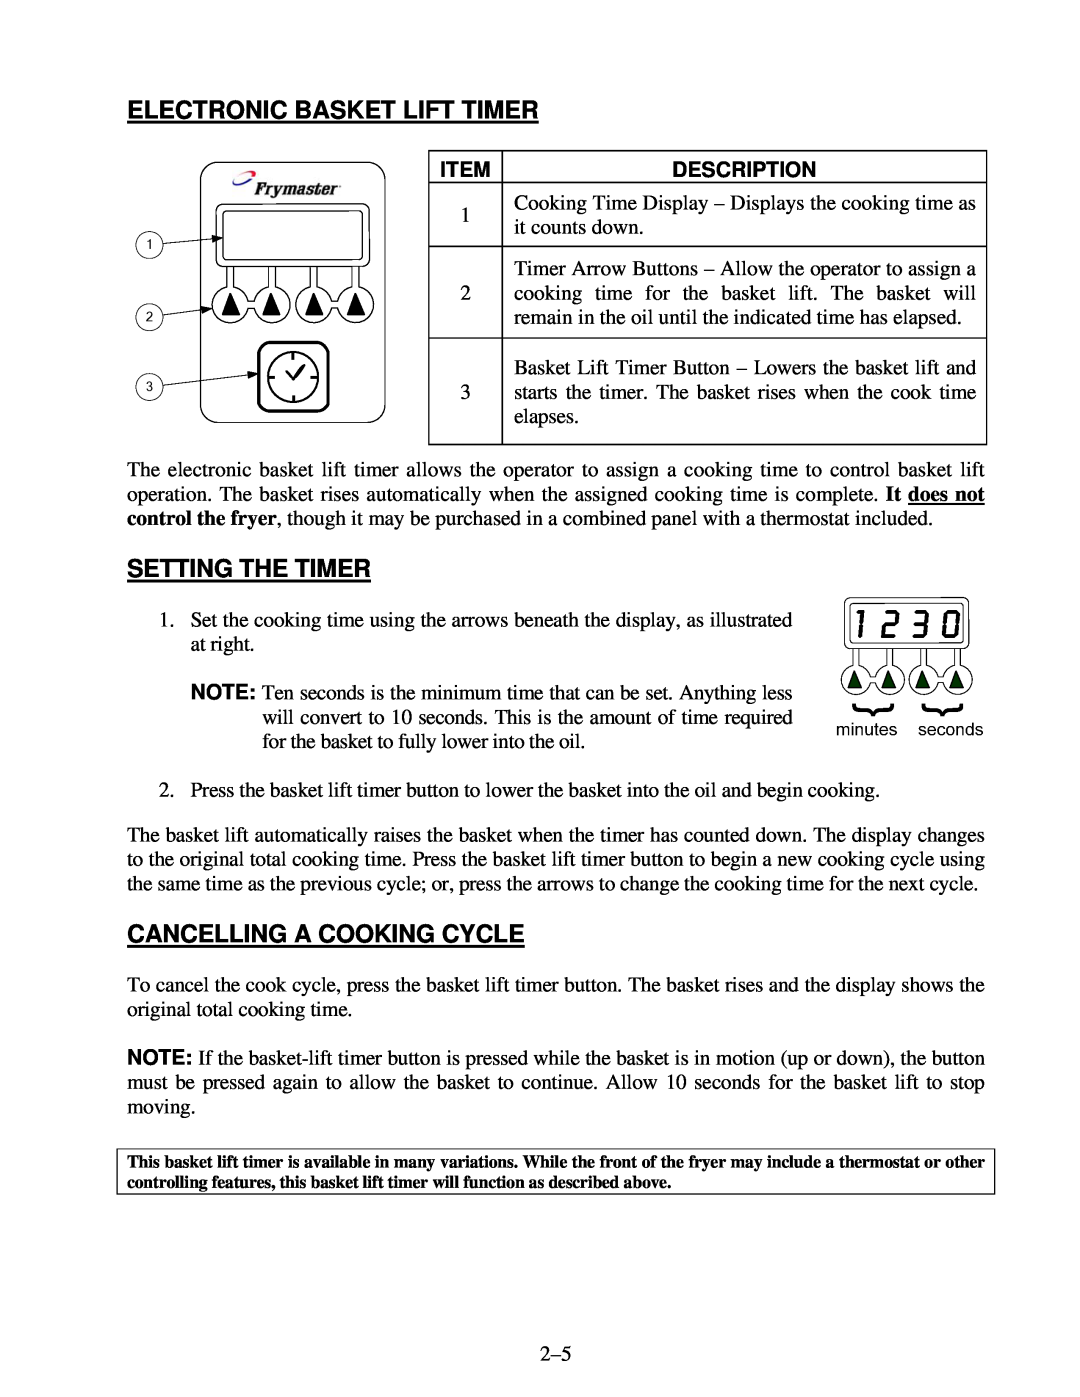 Frymaster 8195916 user manual Electronic Basket Lift Timer, Setting The Timer, Cancelling A Cooking Cycle 